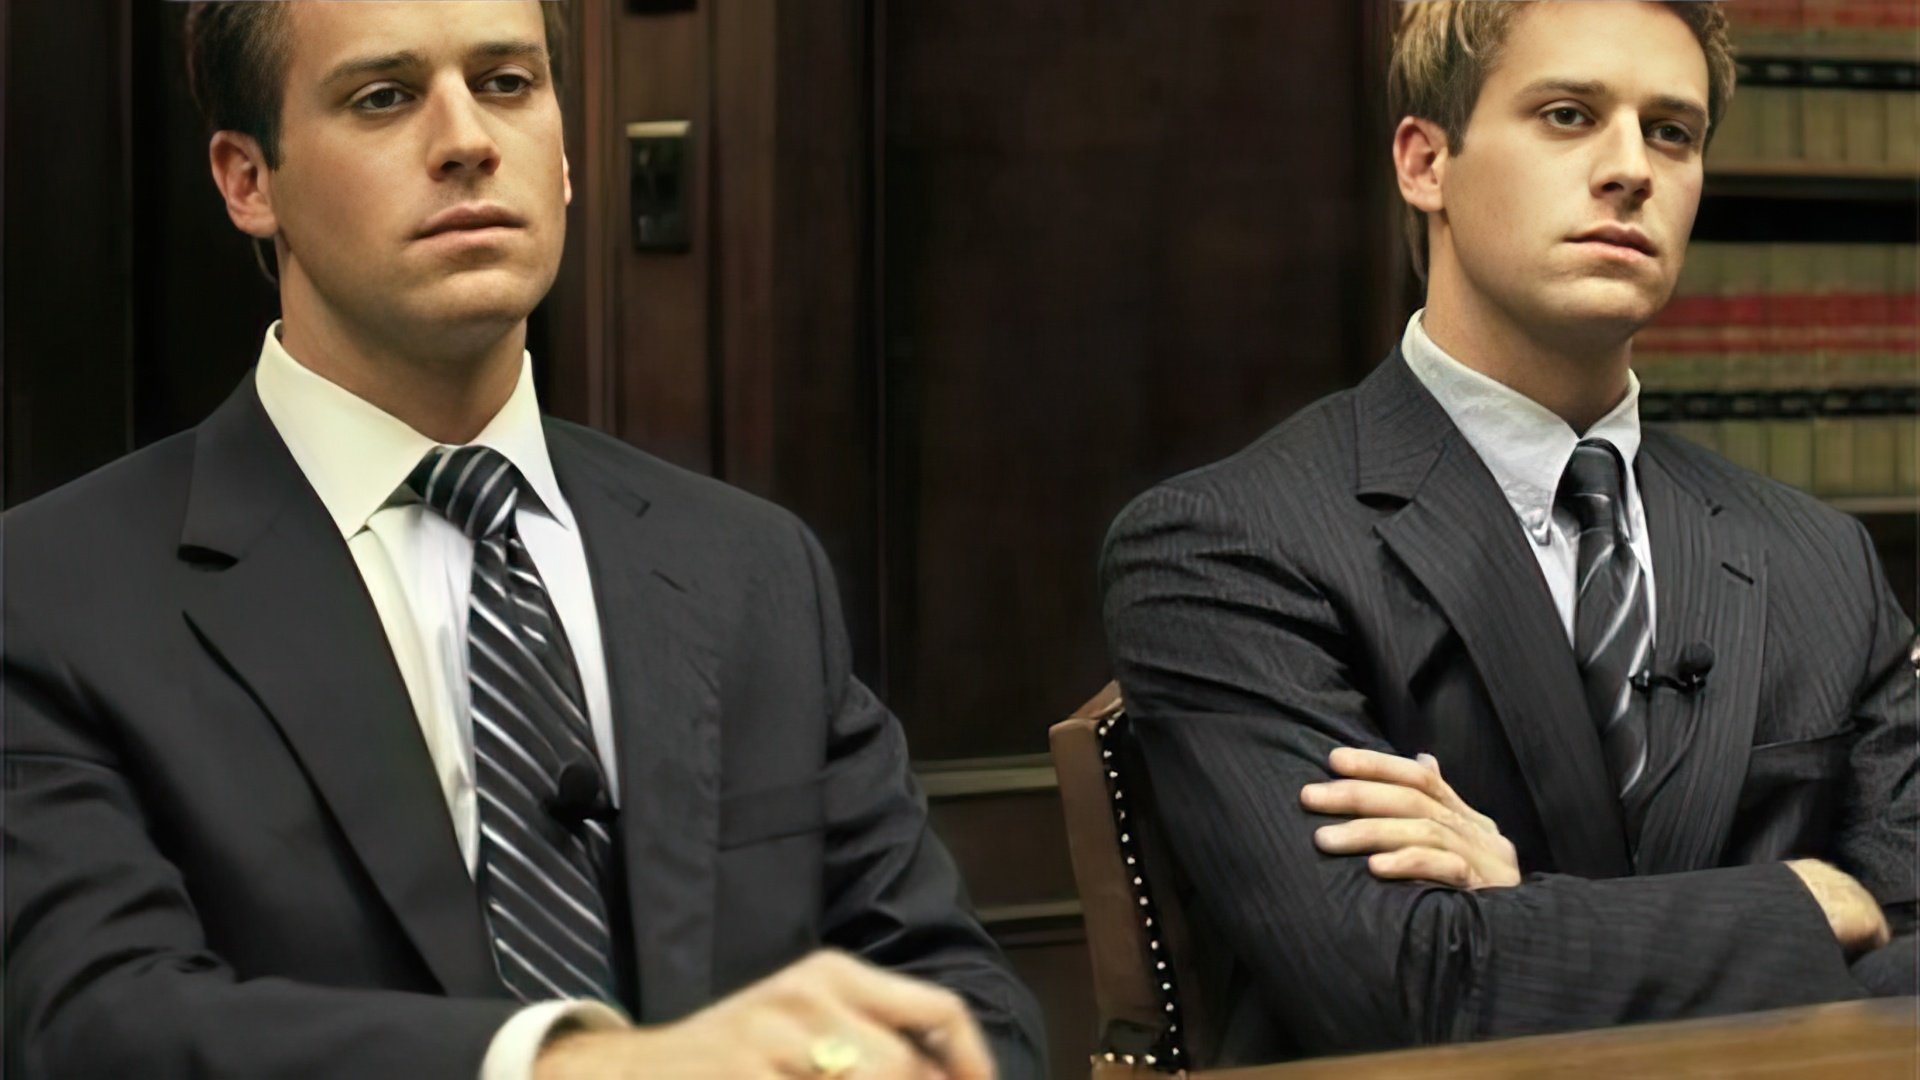 In the movie The Social Network Armie Hammer played as twin brothers